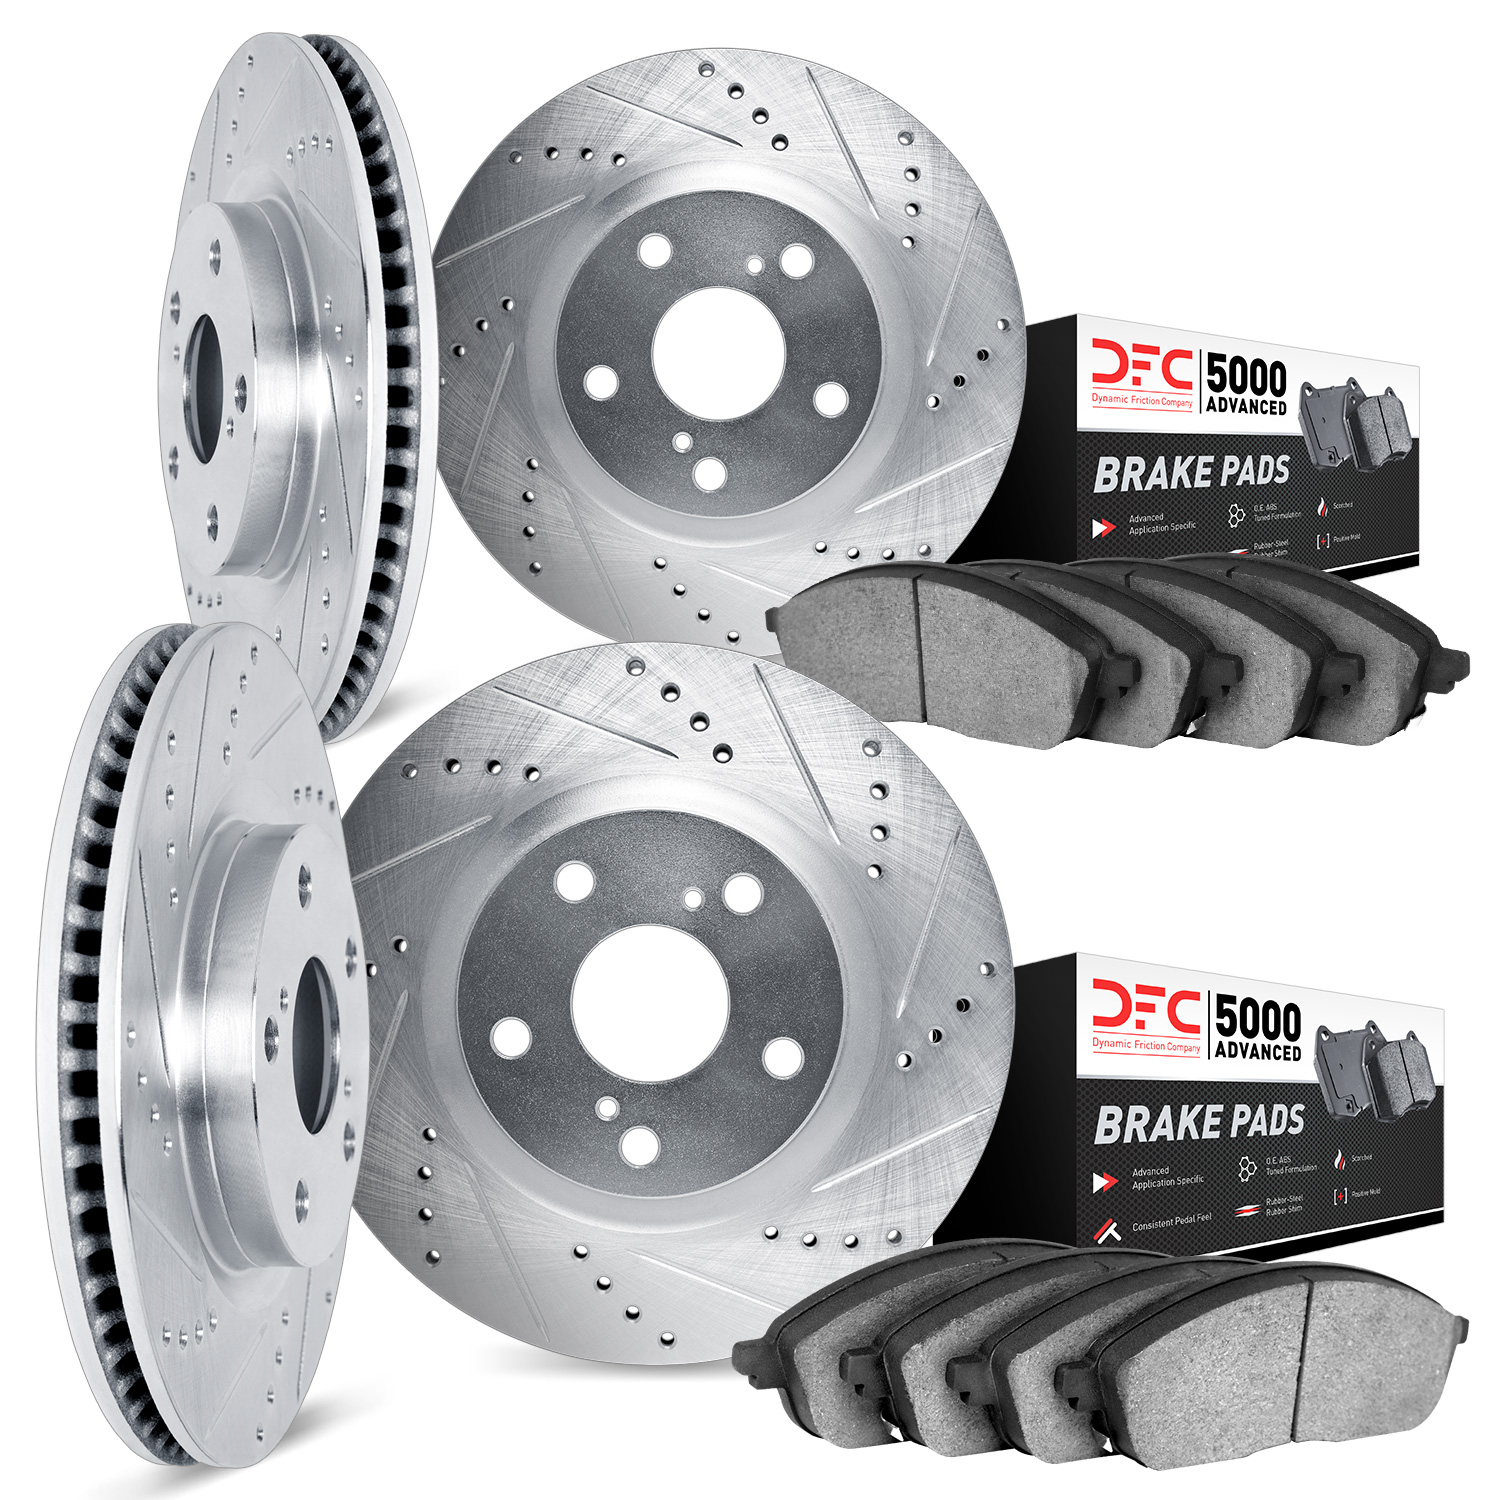 7504-46035 Drilled/Slotted Brake Rotors w/5000 Advanced Brake Pads Kit [Silver], 2005-2010 GM, Position: Front and Rear